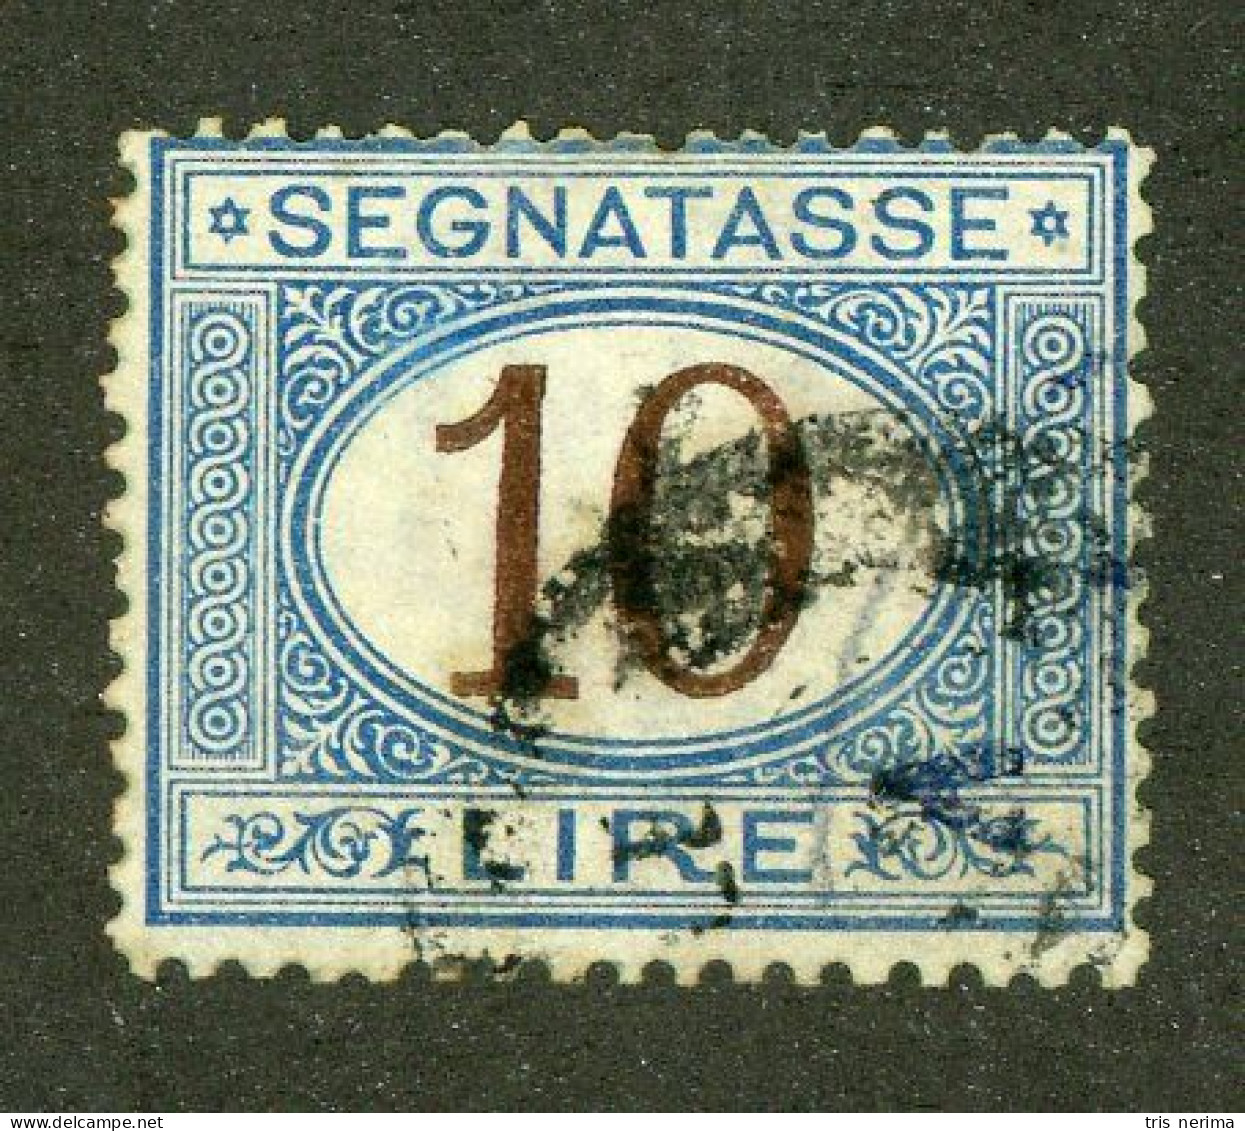 975 Italy 1870 Scott #J19 Used (Lower Bids 20% Off) - Postage Due